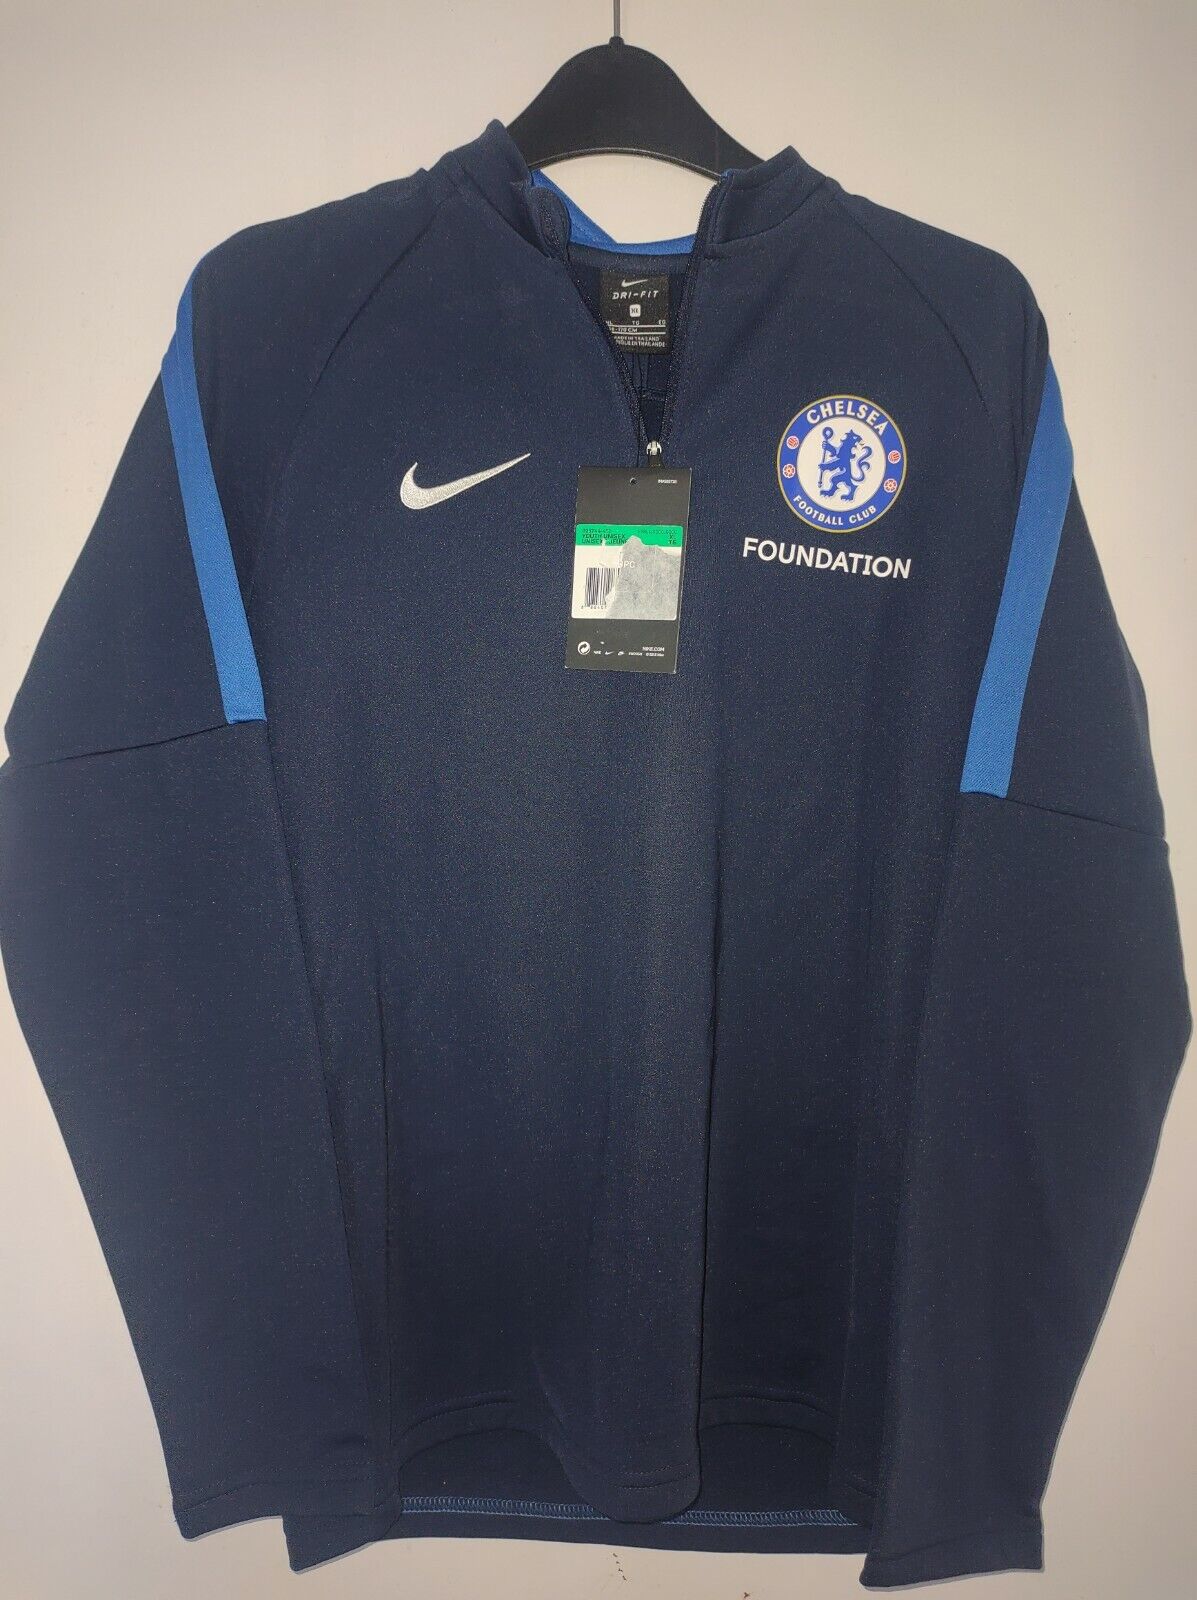 Bnwt Nike Youth Dri-fit 1/4 Zip Chelsea FC Foundation Rare Jerse